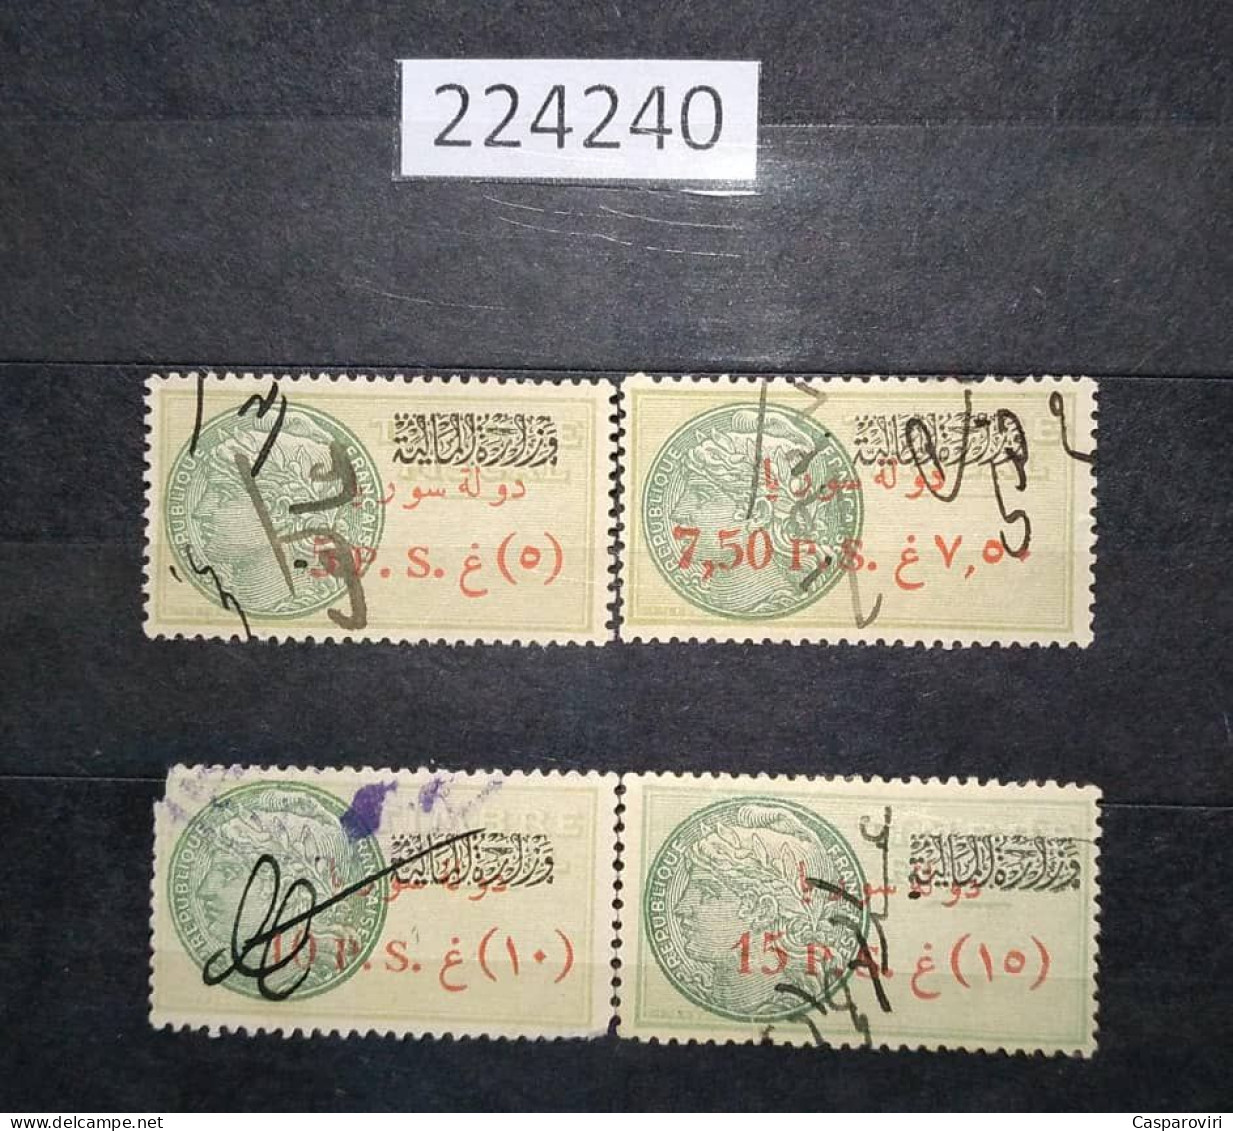 224240; French Colonies; Syria; 4 Revenue French Stamps 5, 7.5, 10, 15  Piasters ;Ovpt. Etat De Syrie; USED - Oblitérés